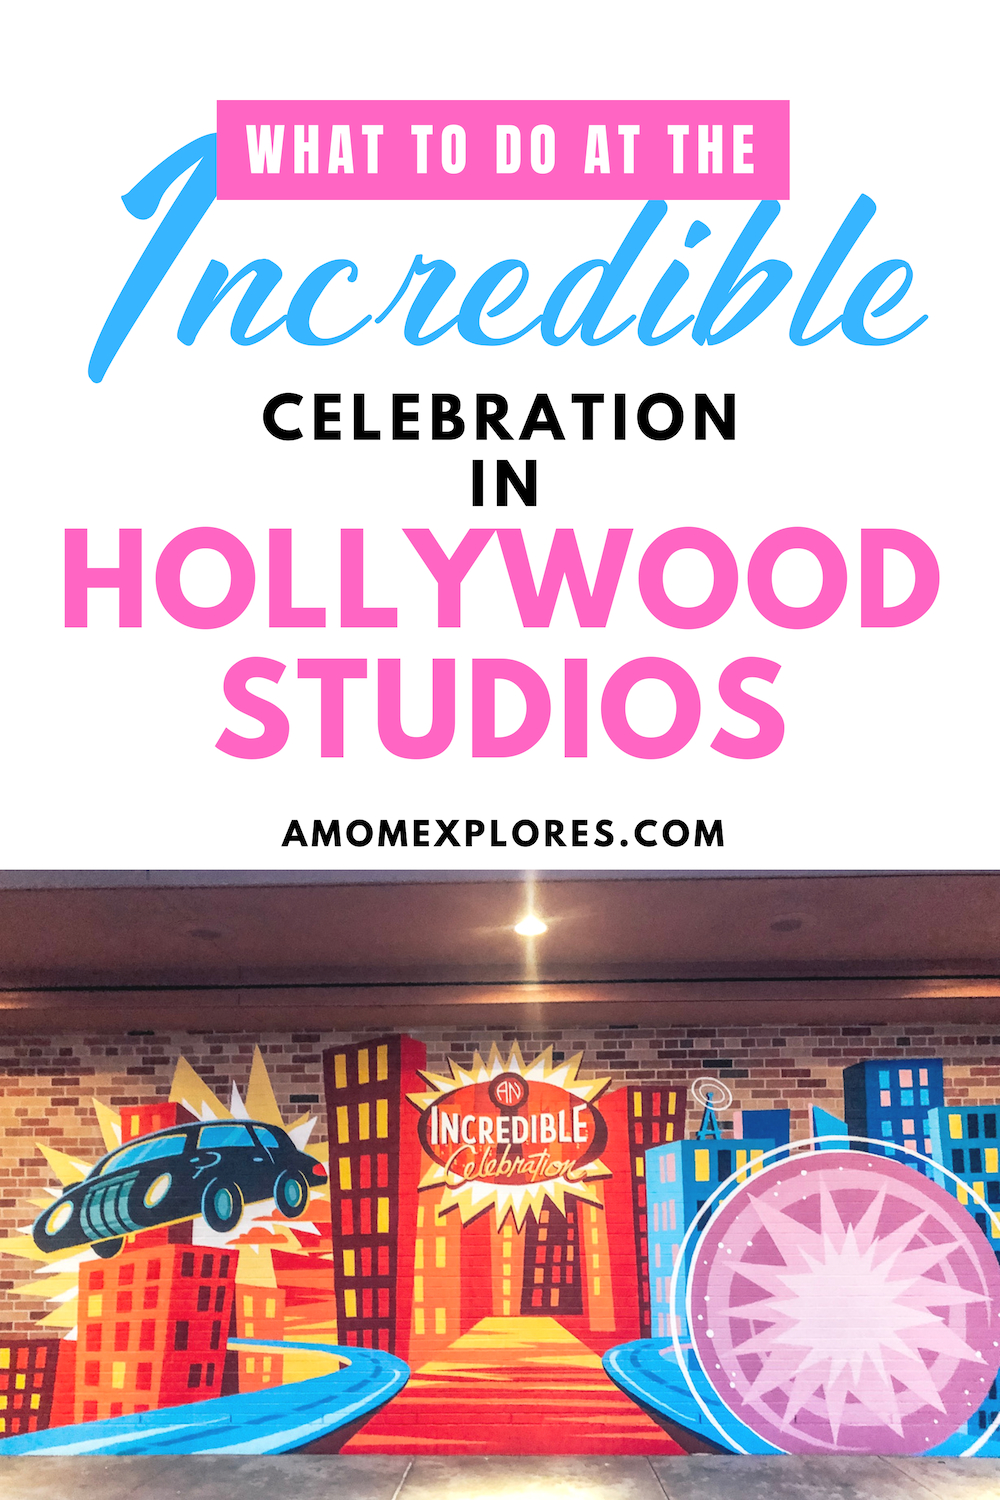 Have you visited the Incredibles Celebration at Hollywood Studios? It's the perfect spot to celebrate with the Incredibles and participate in the Super Shindig at Pixar Place near Toy Story Land. Find out where to fi-2.jpg